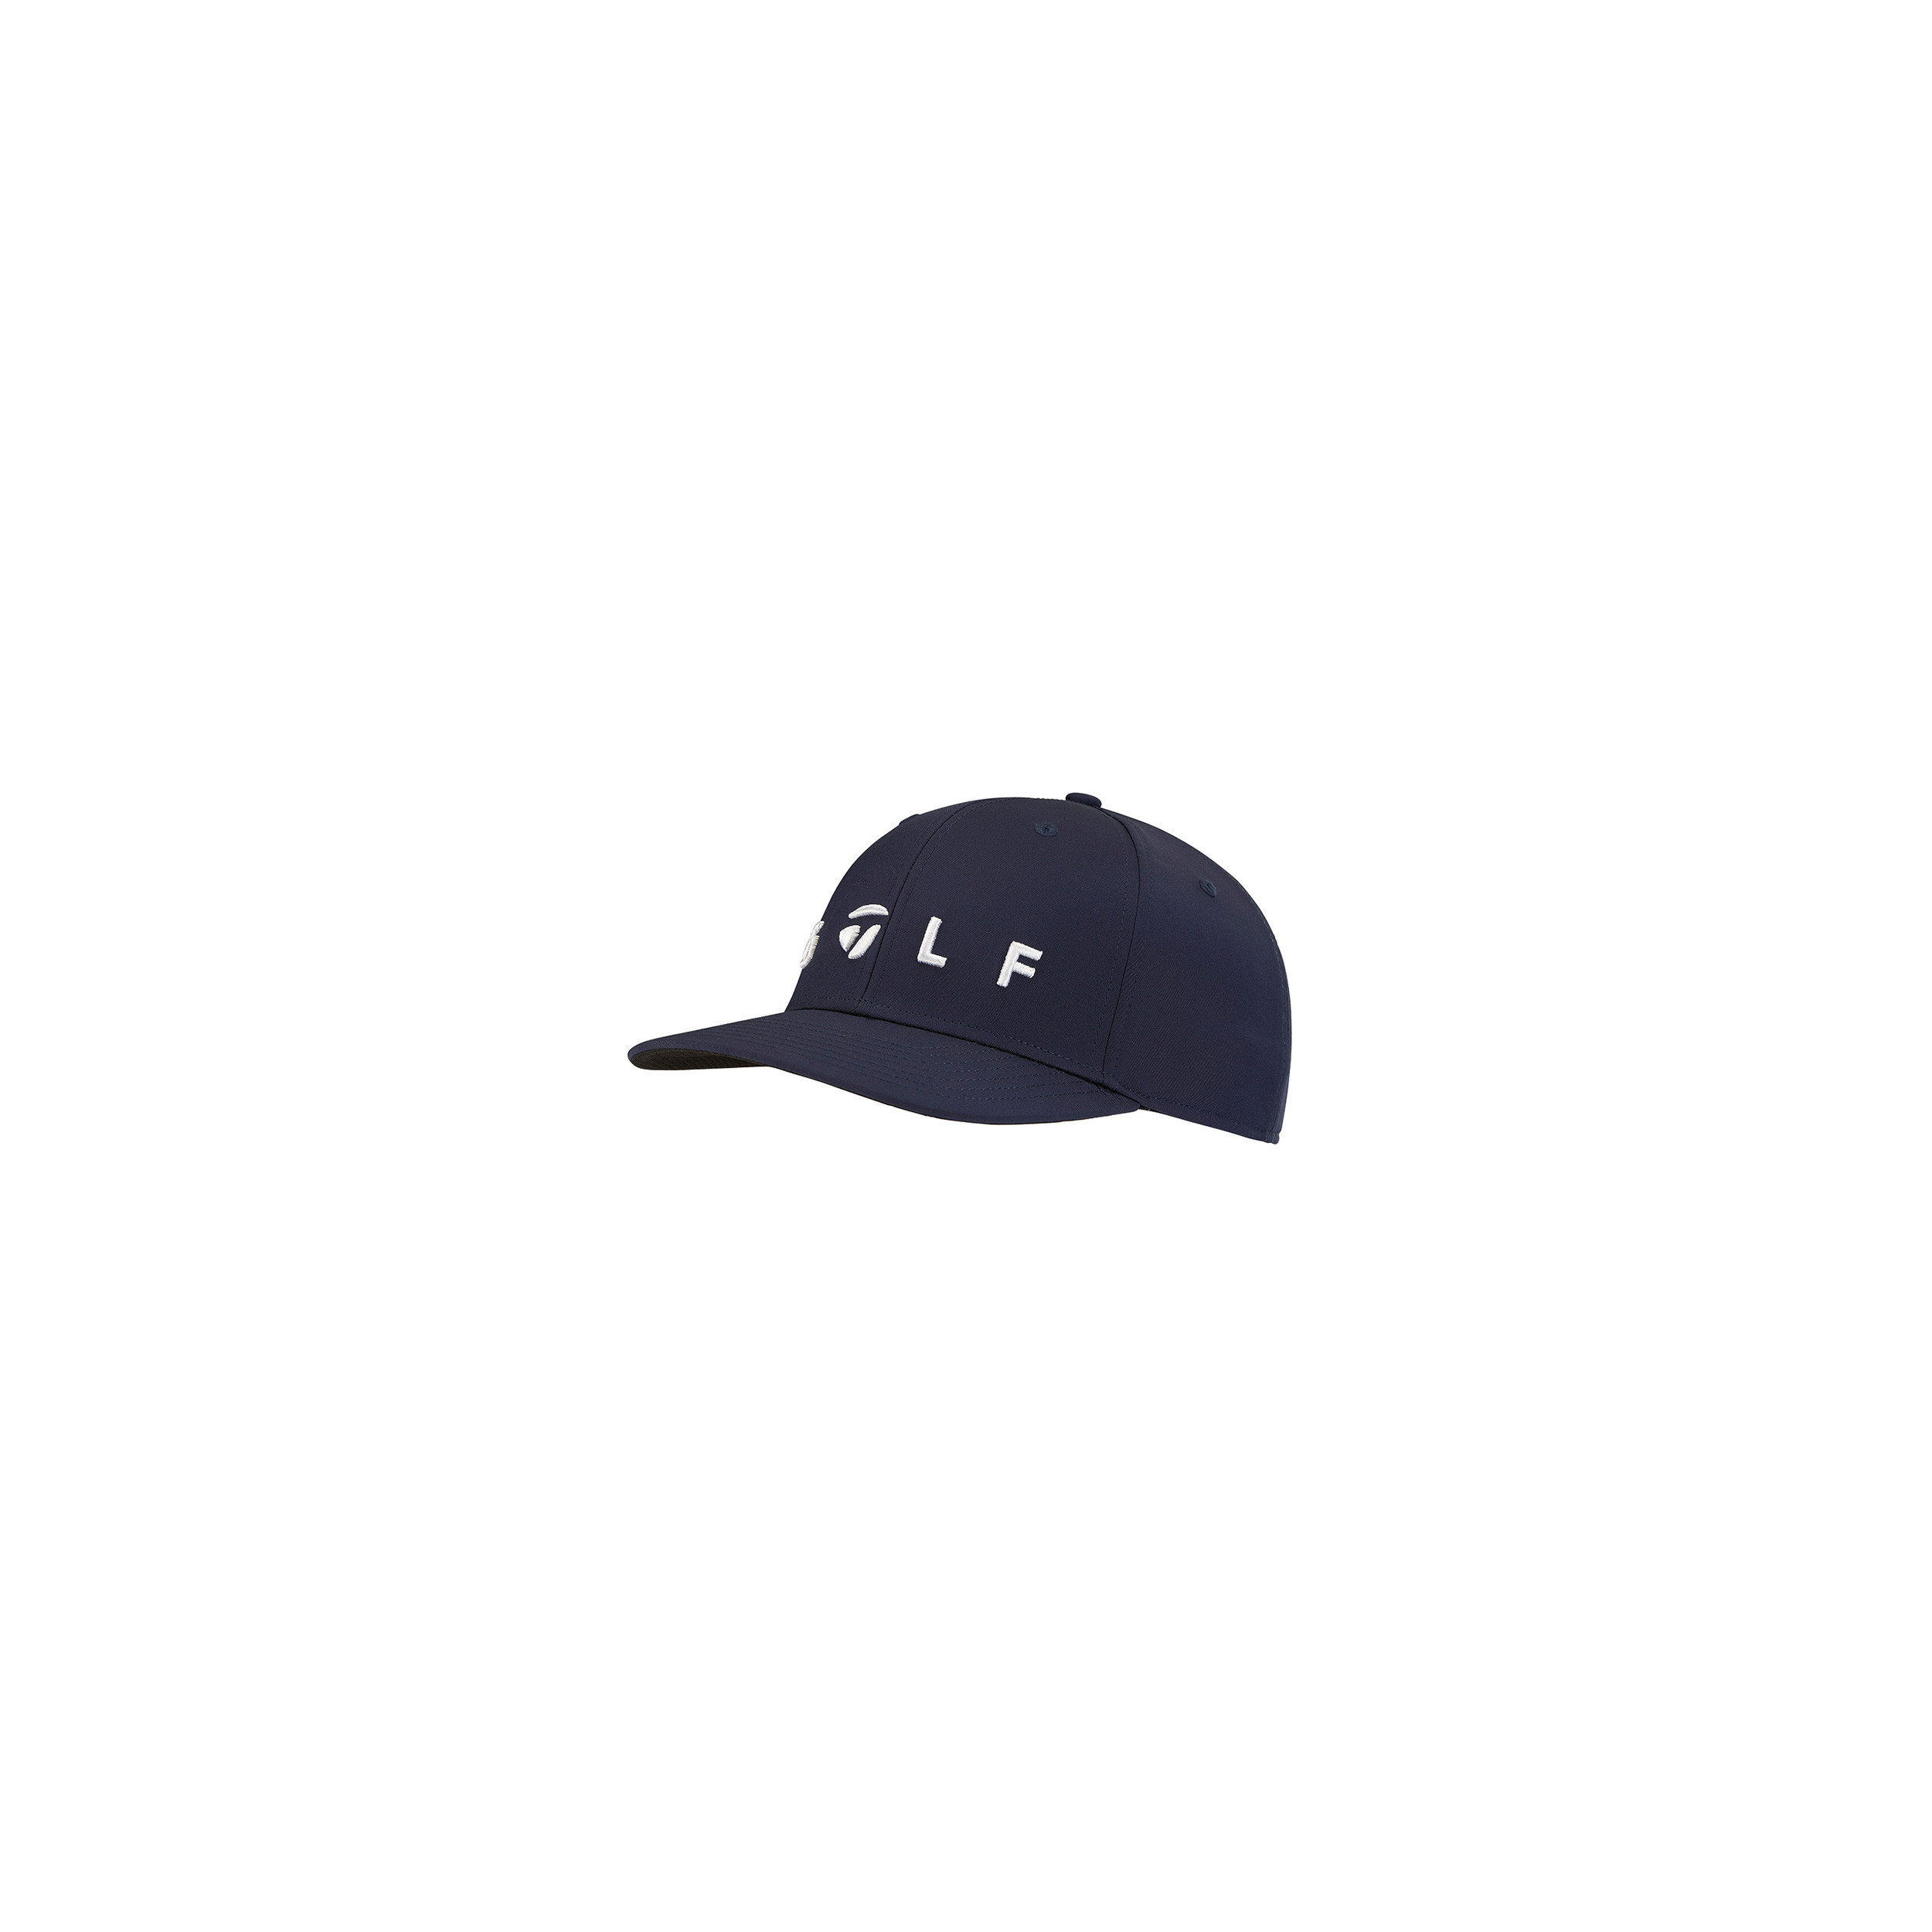 THE HAT TAYLORMADE LIFESTYLE GOLF LOGO